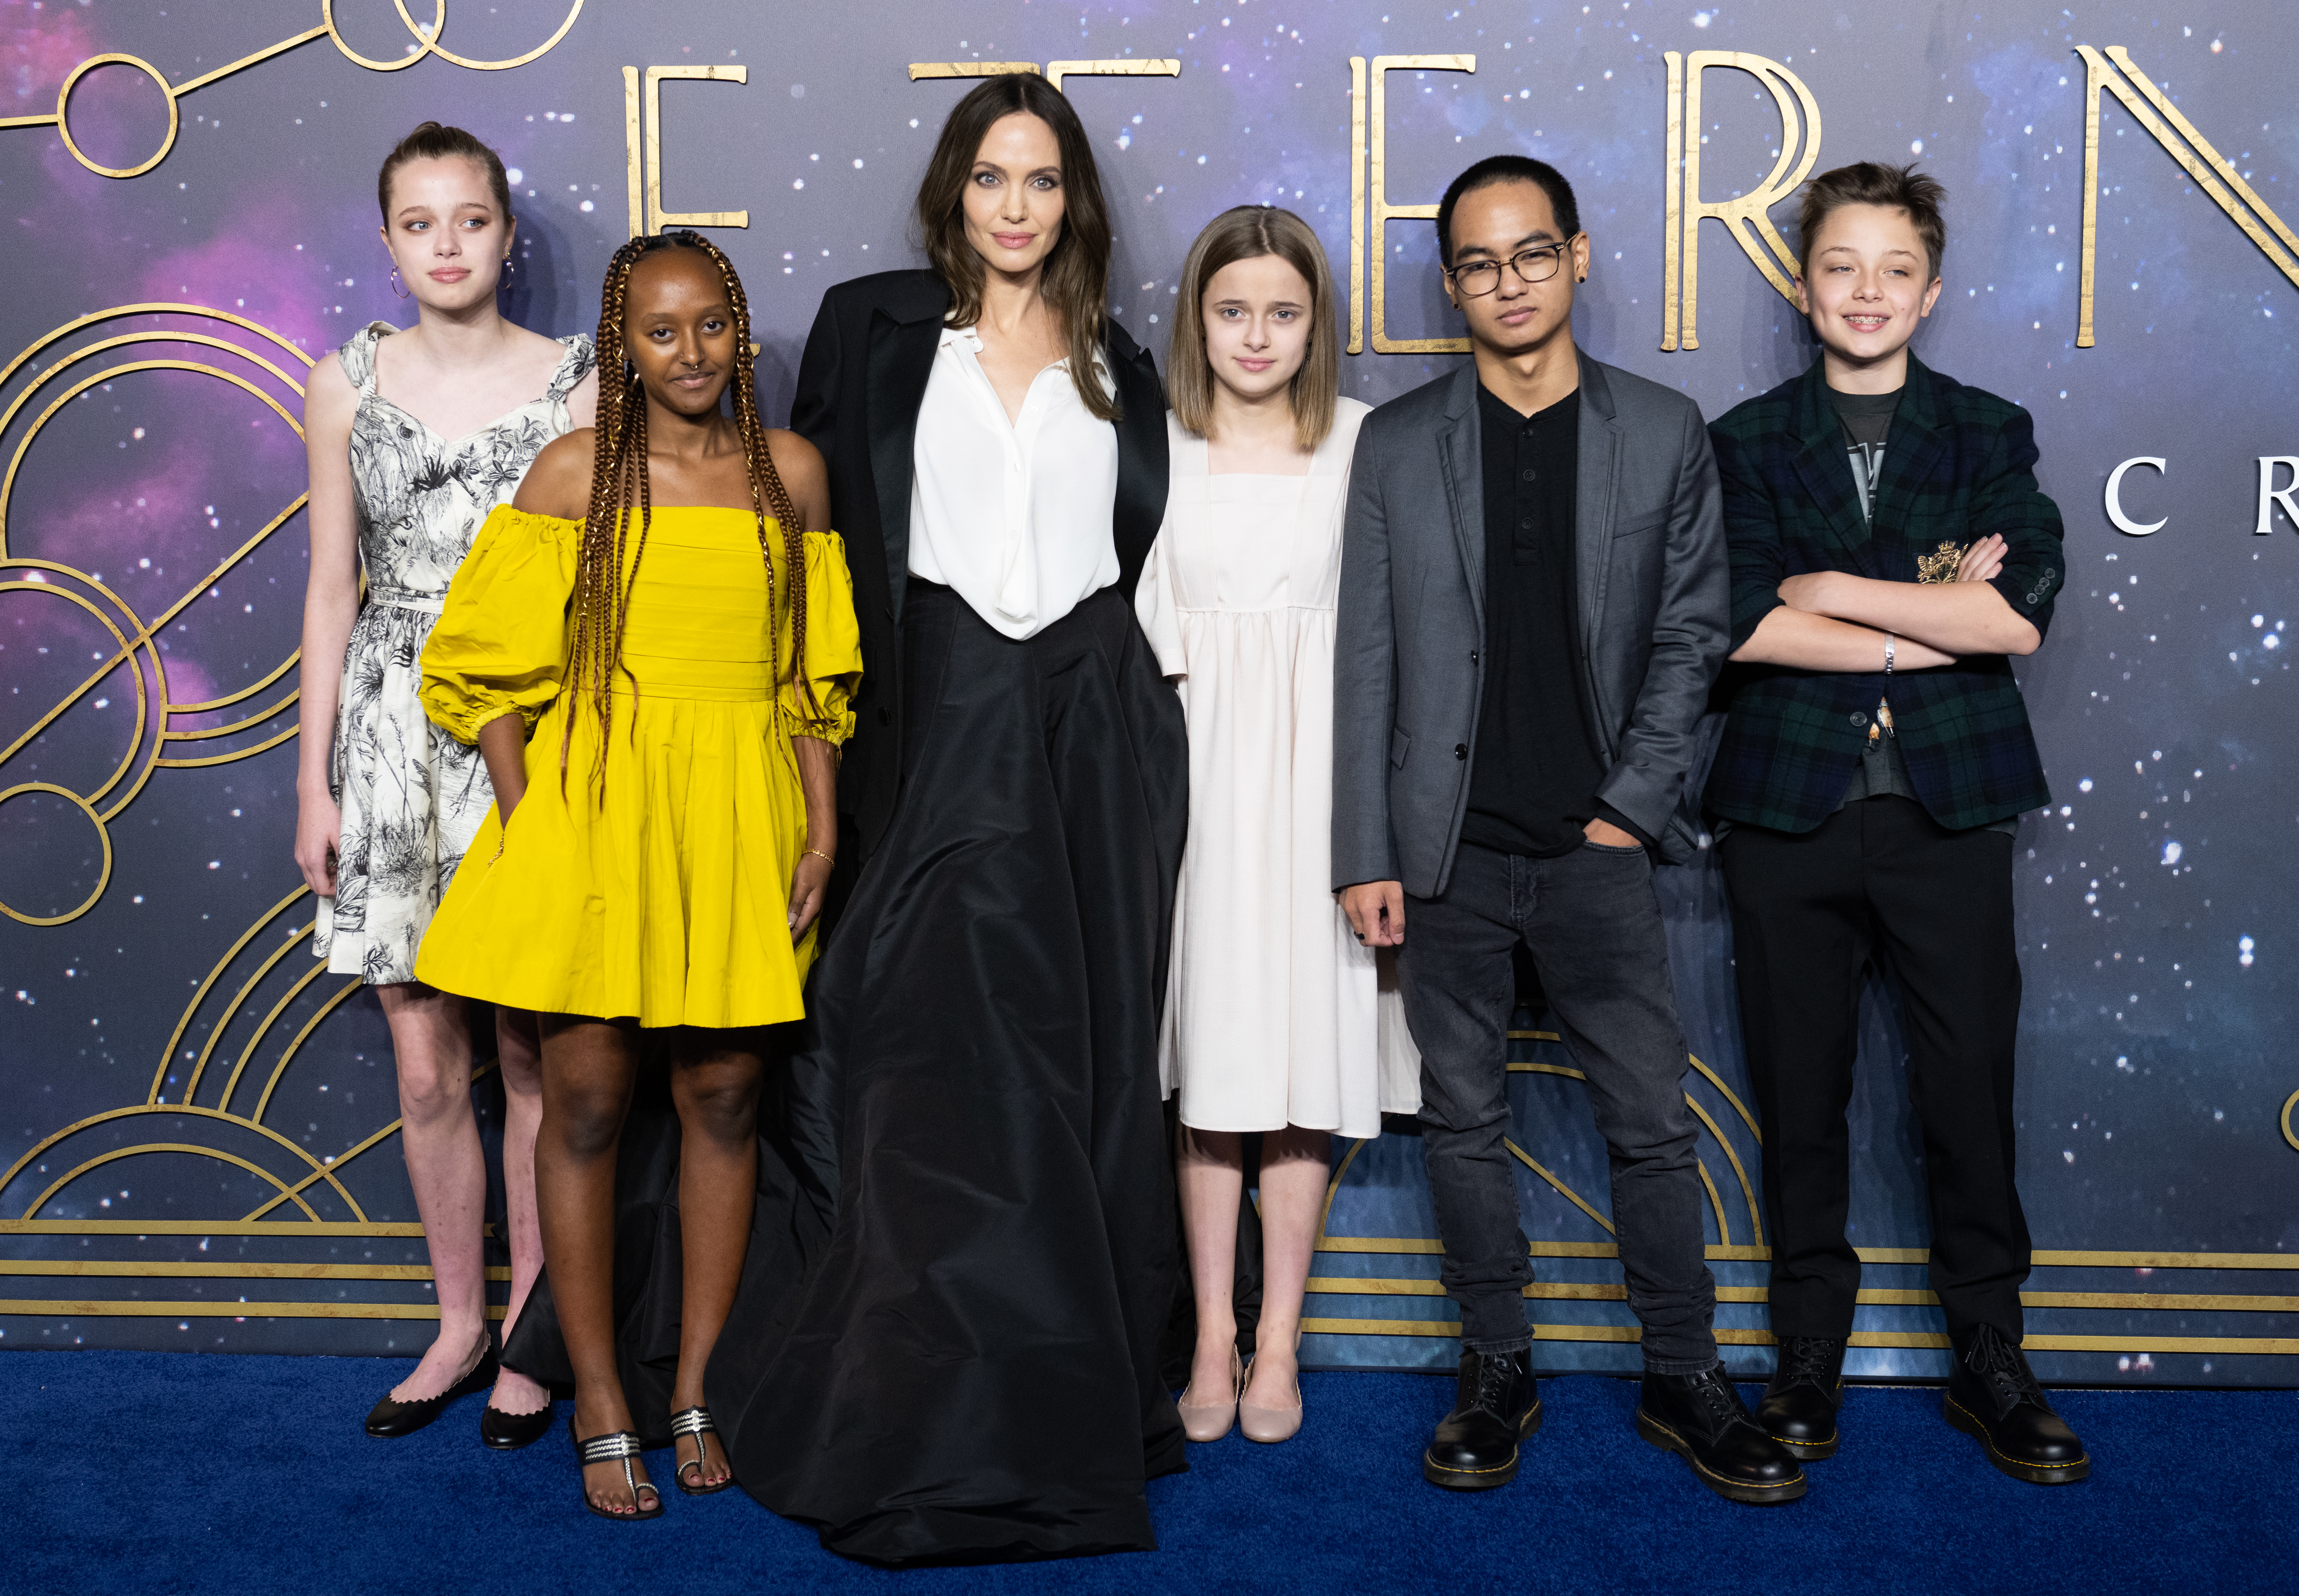 Angelina Jolie with her children, Shiloh, Zahara, Vivienne, Maddox and Knox Jolie-Pitt during the "The Eternals" UK premiere on October 27, 2021 in London, England | Source: Getty Images